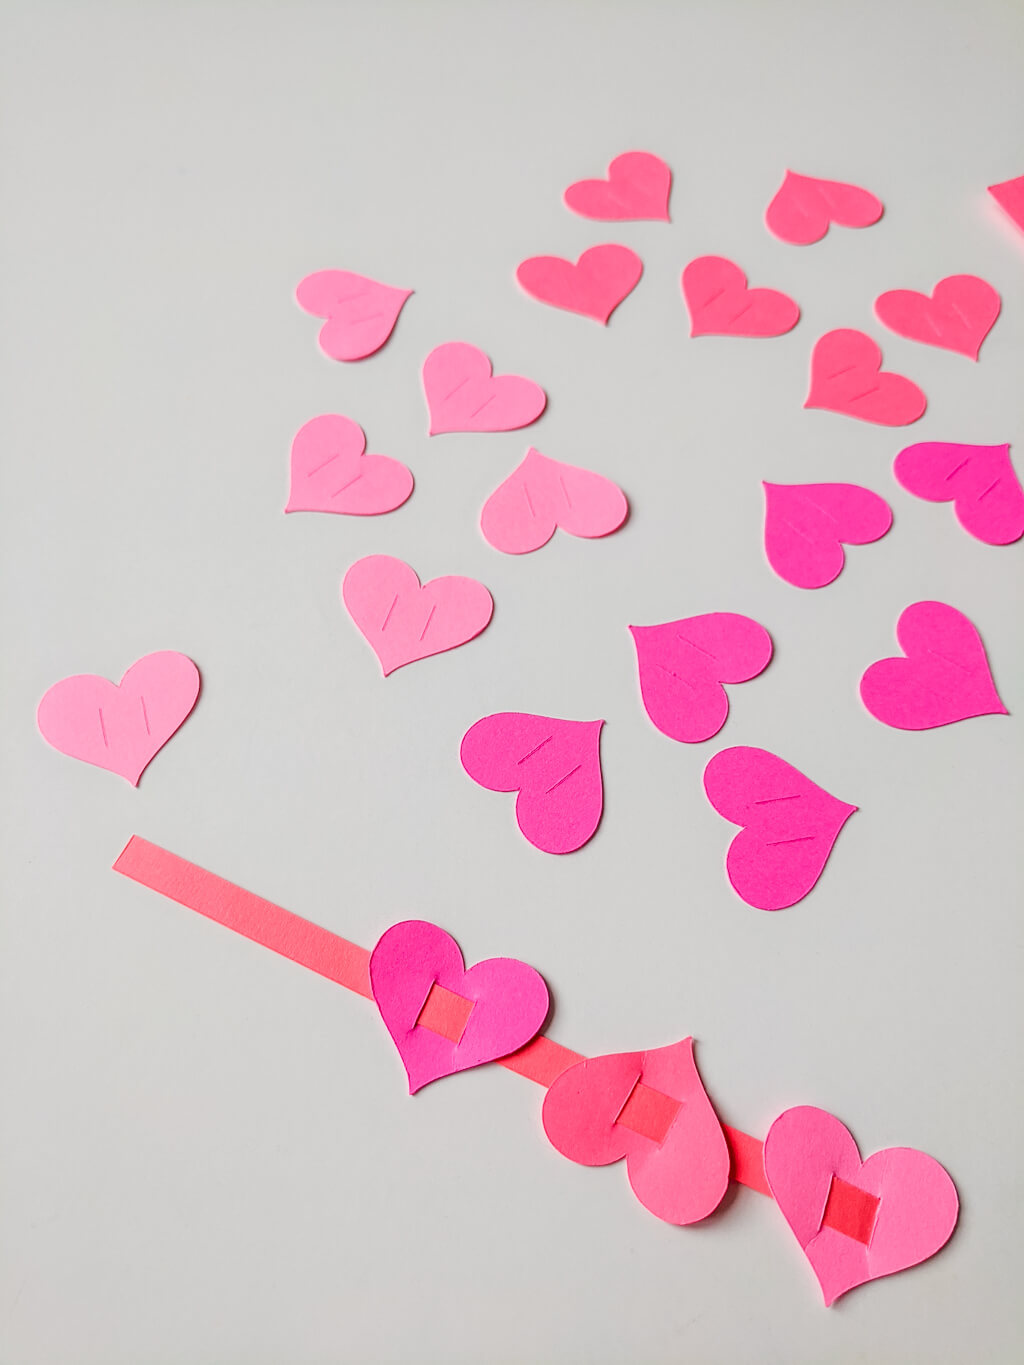 Weaving paper hearts for a Valentine's Day card